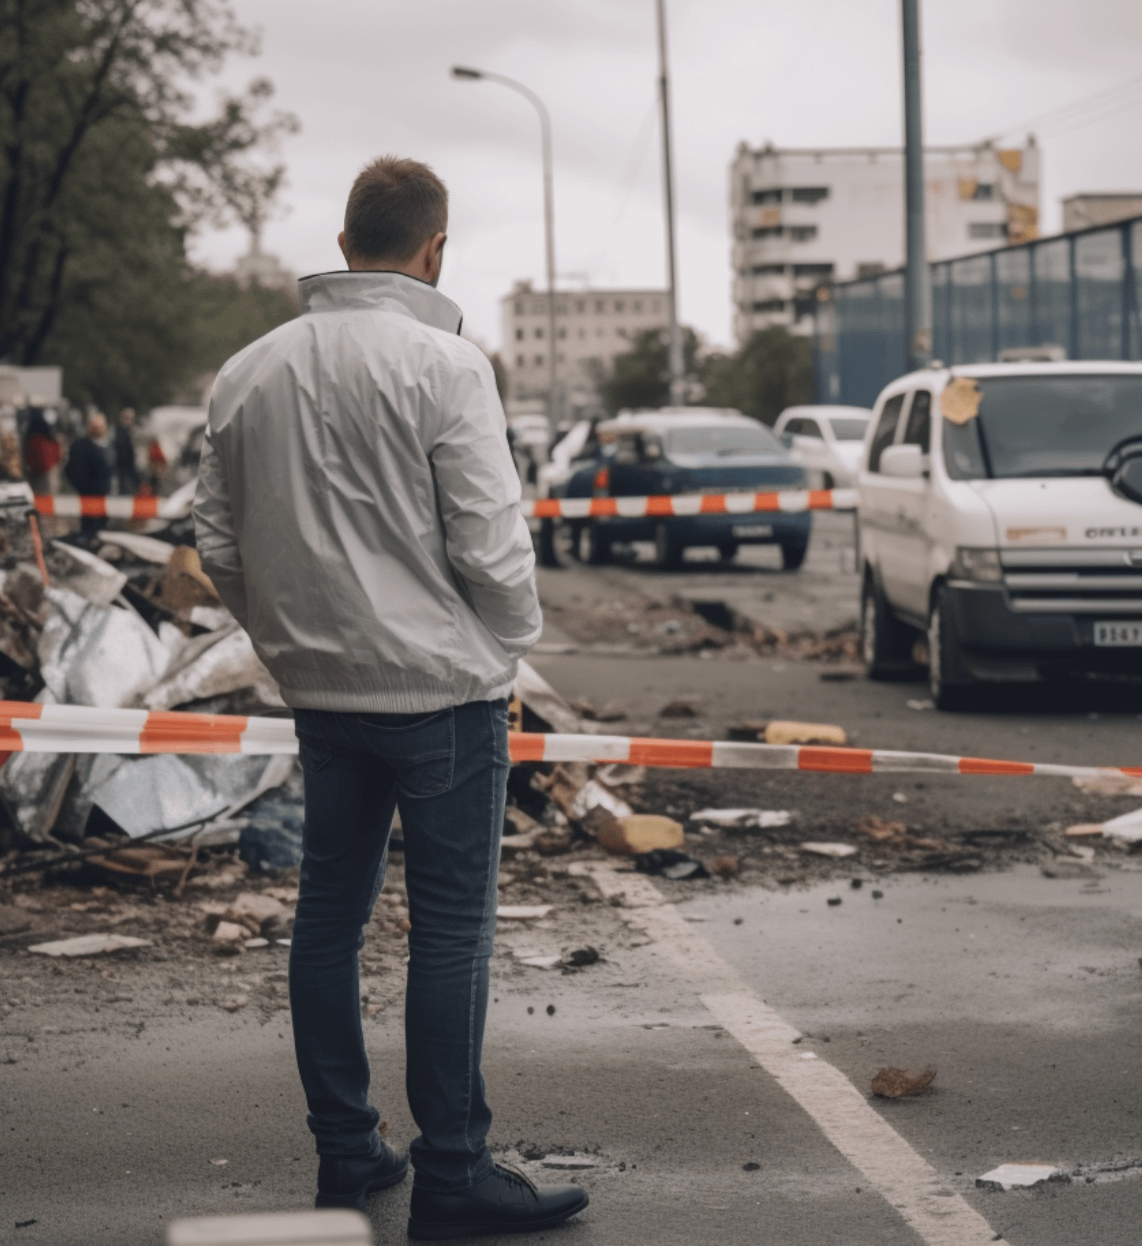 A person looking at an accident site